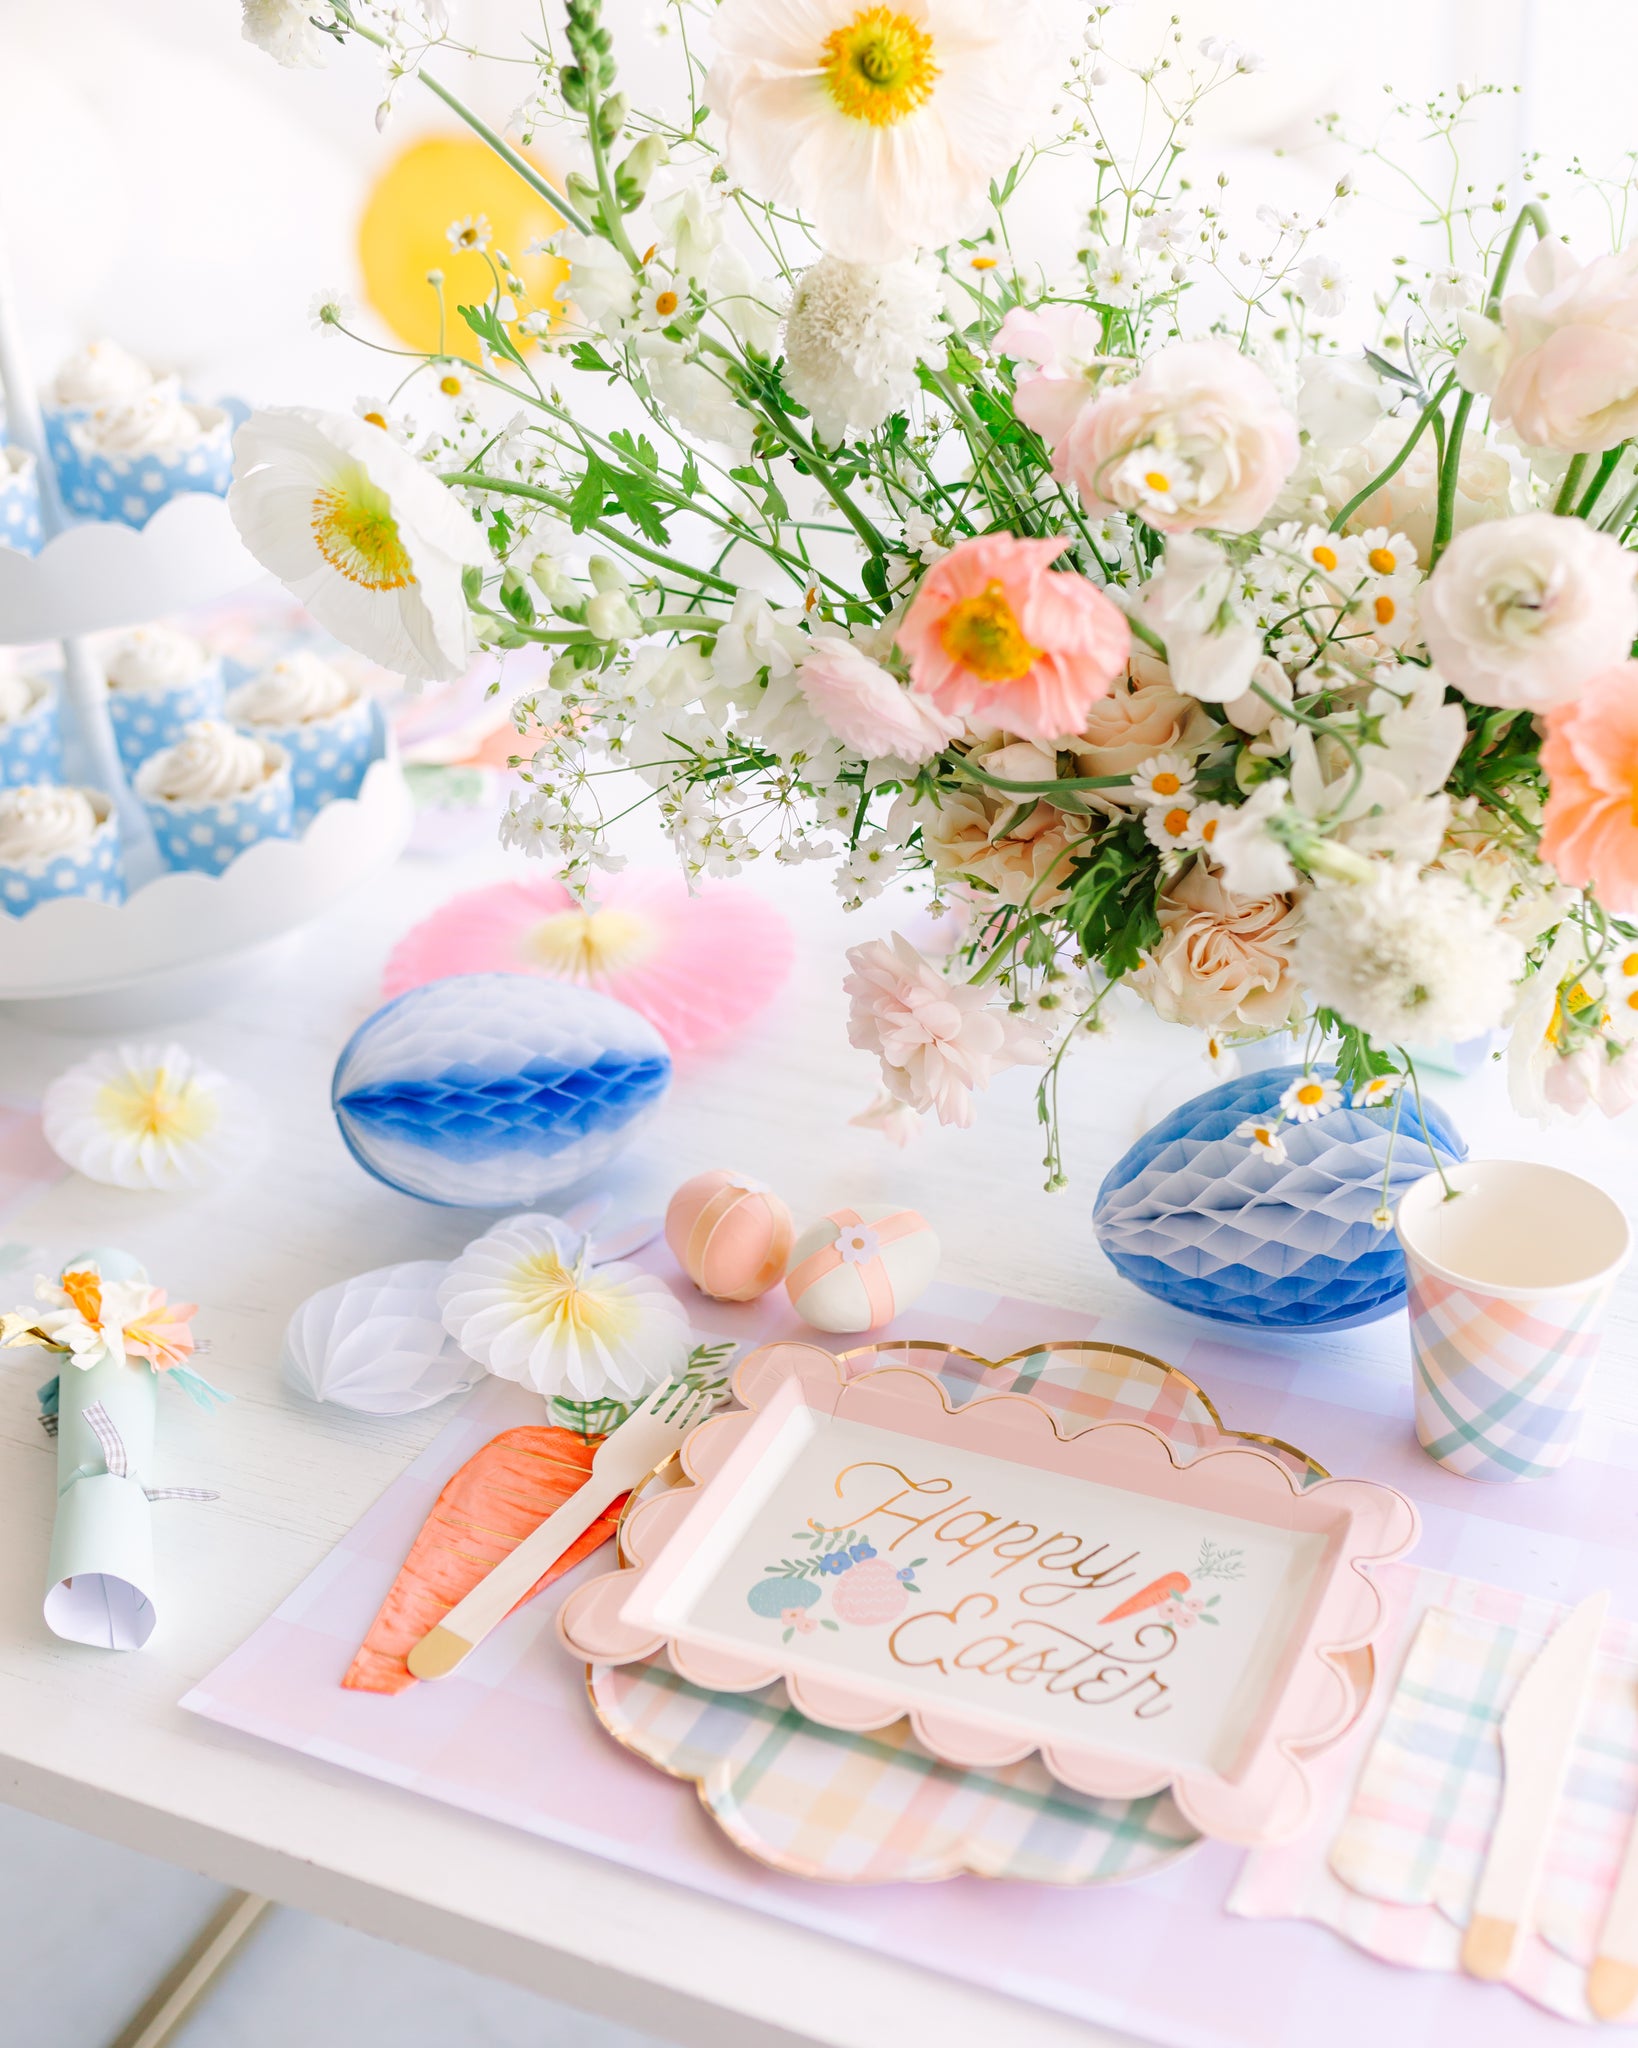 Pastel and daisy theme Easter table setting ideas.